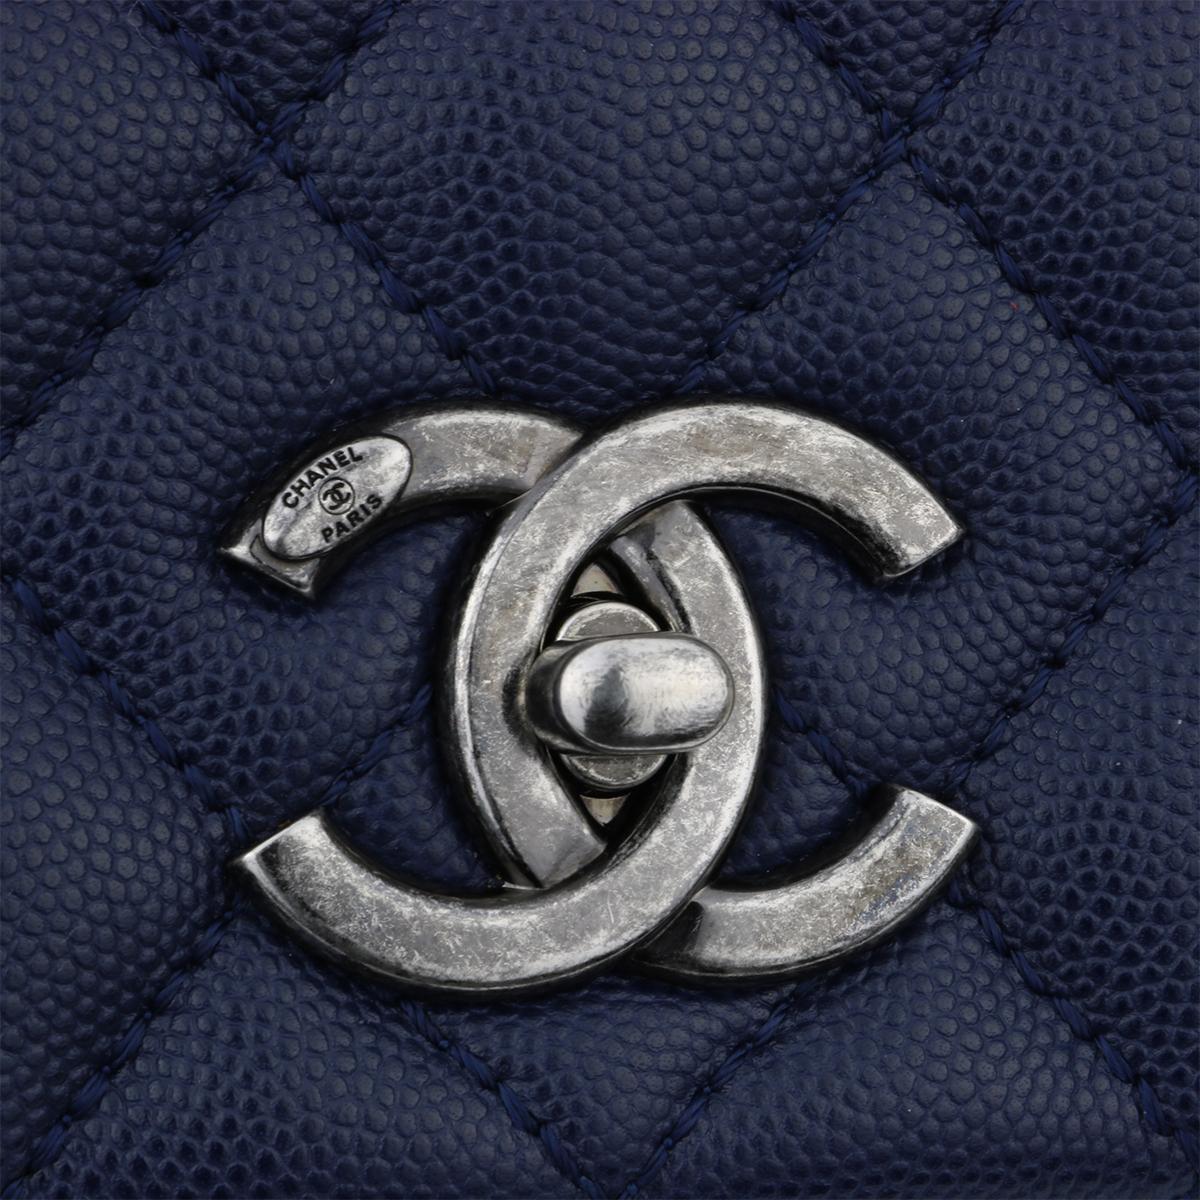 Authentic CHANEL Coco Handle Bag Large Navy Caviar with Ruthenium Hardware 2017.

This bag is in mint condition, the bag still holds its shape well, and the hardware is still shiny.

Exterior Condition: Mint condition, corners show no visible signs